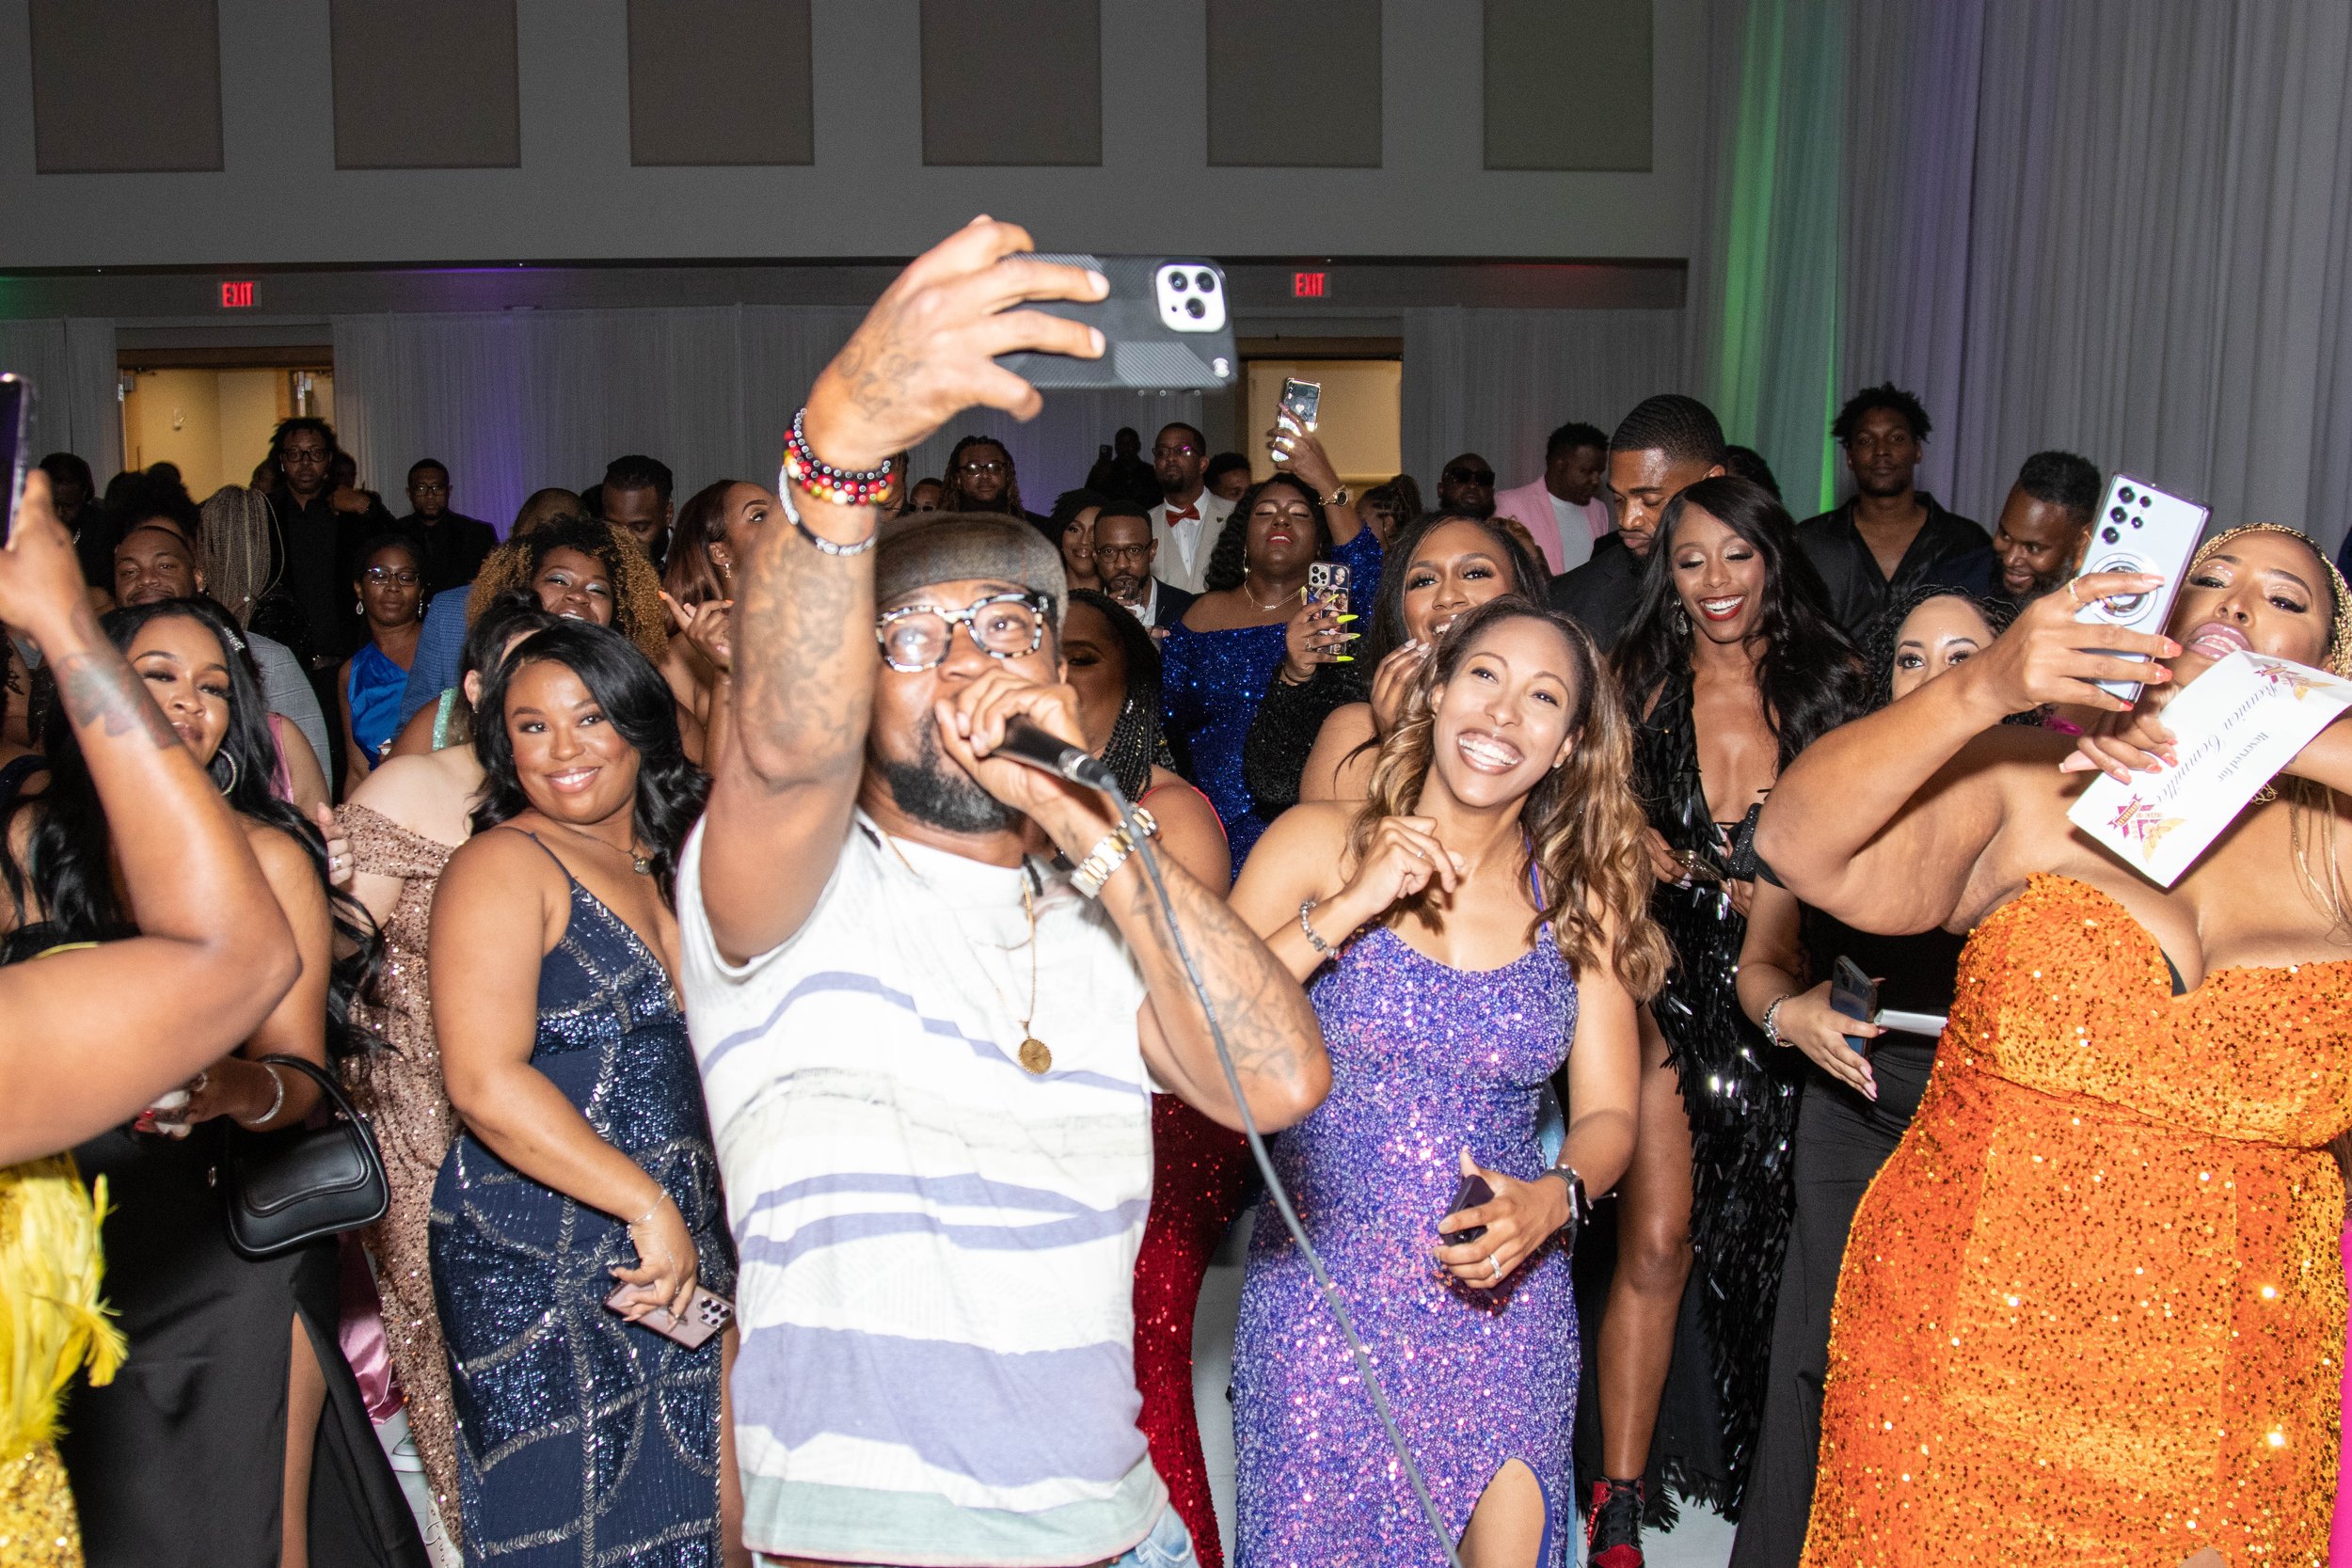 McD 35's Class of '03 enjoys a lively dance floor at their Sneaker Ball, with a guest performance in the background.